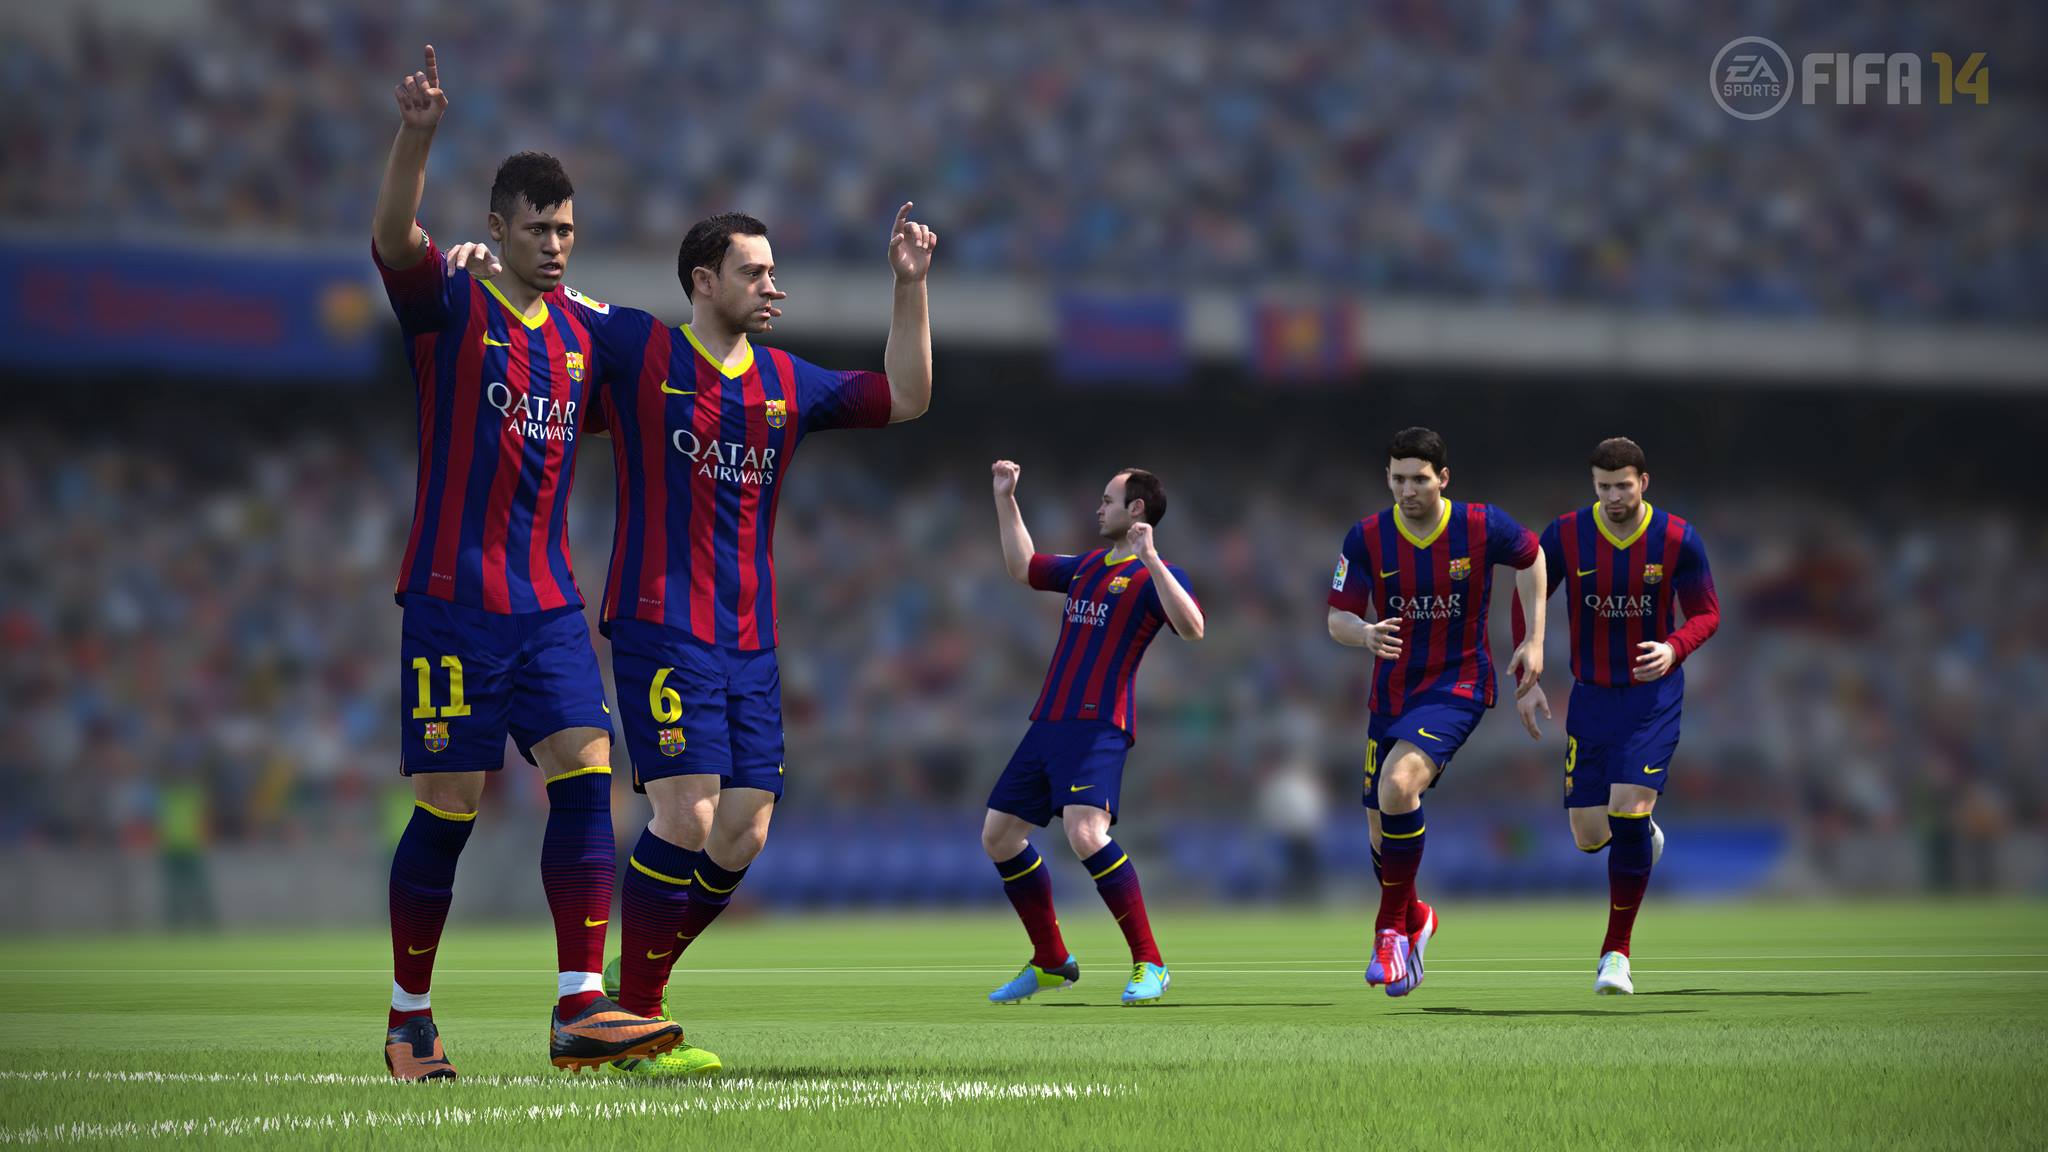 Download FIFA 15 Ultimate Team 170 for android